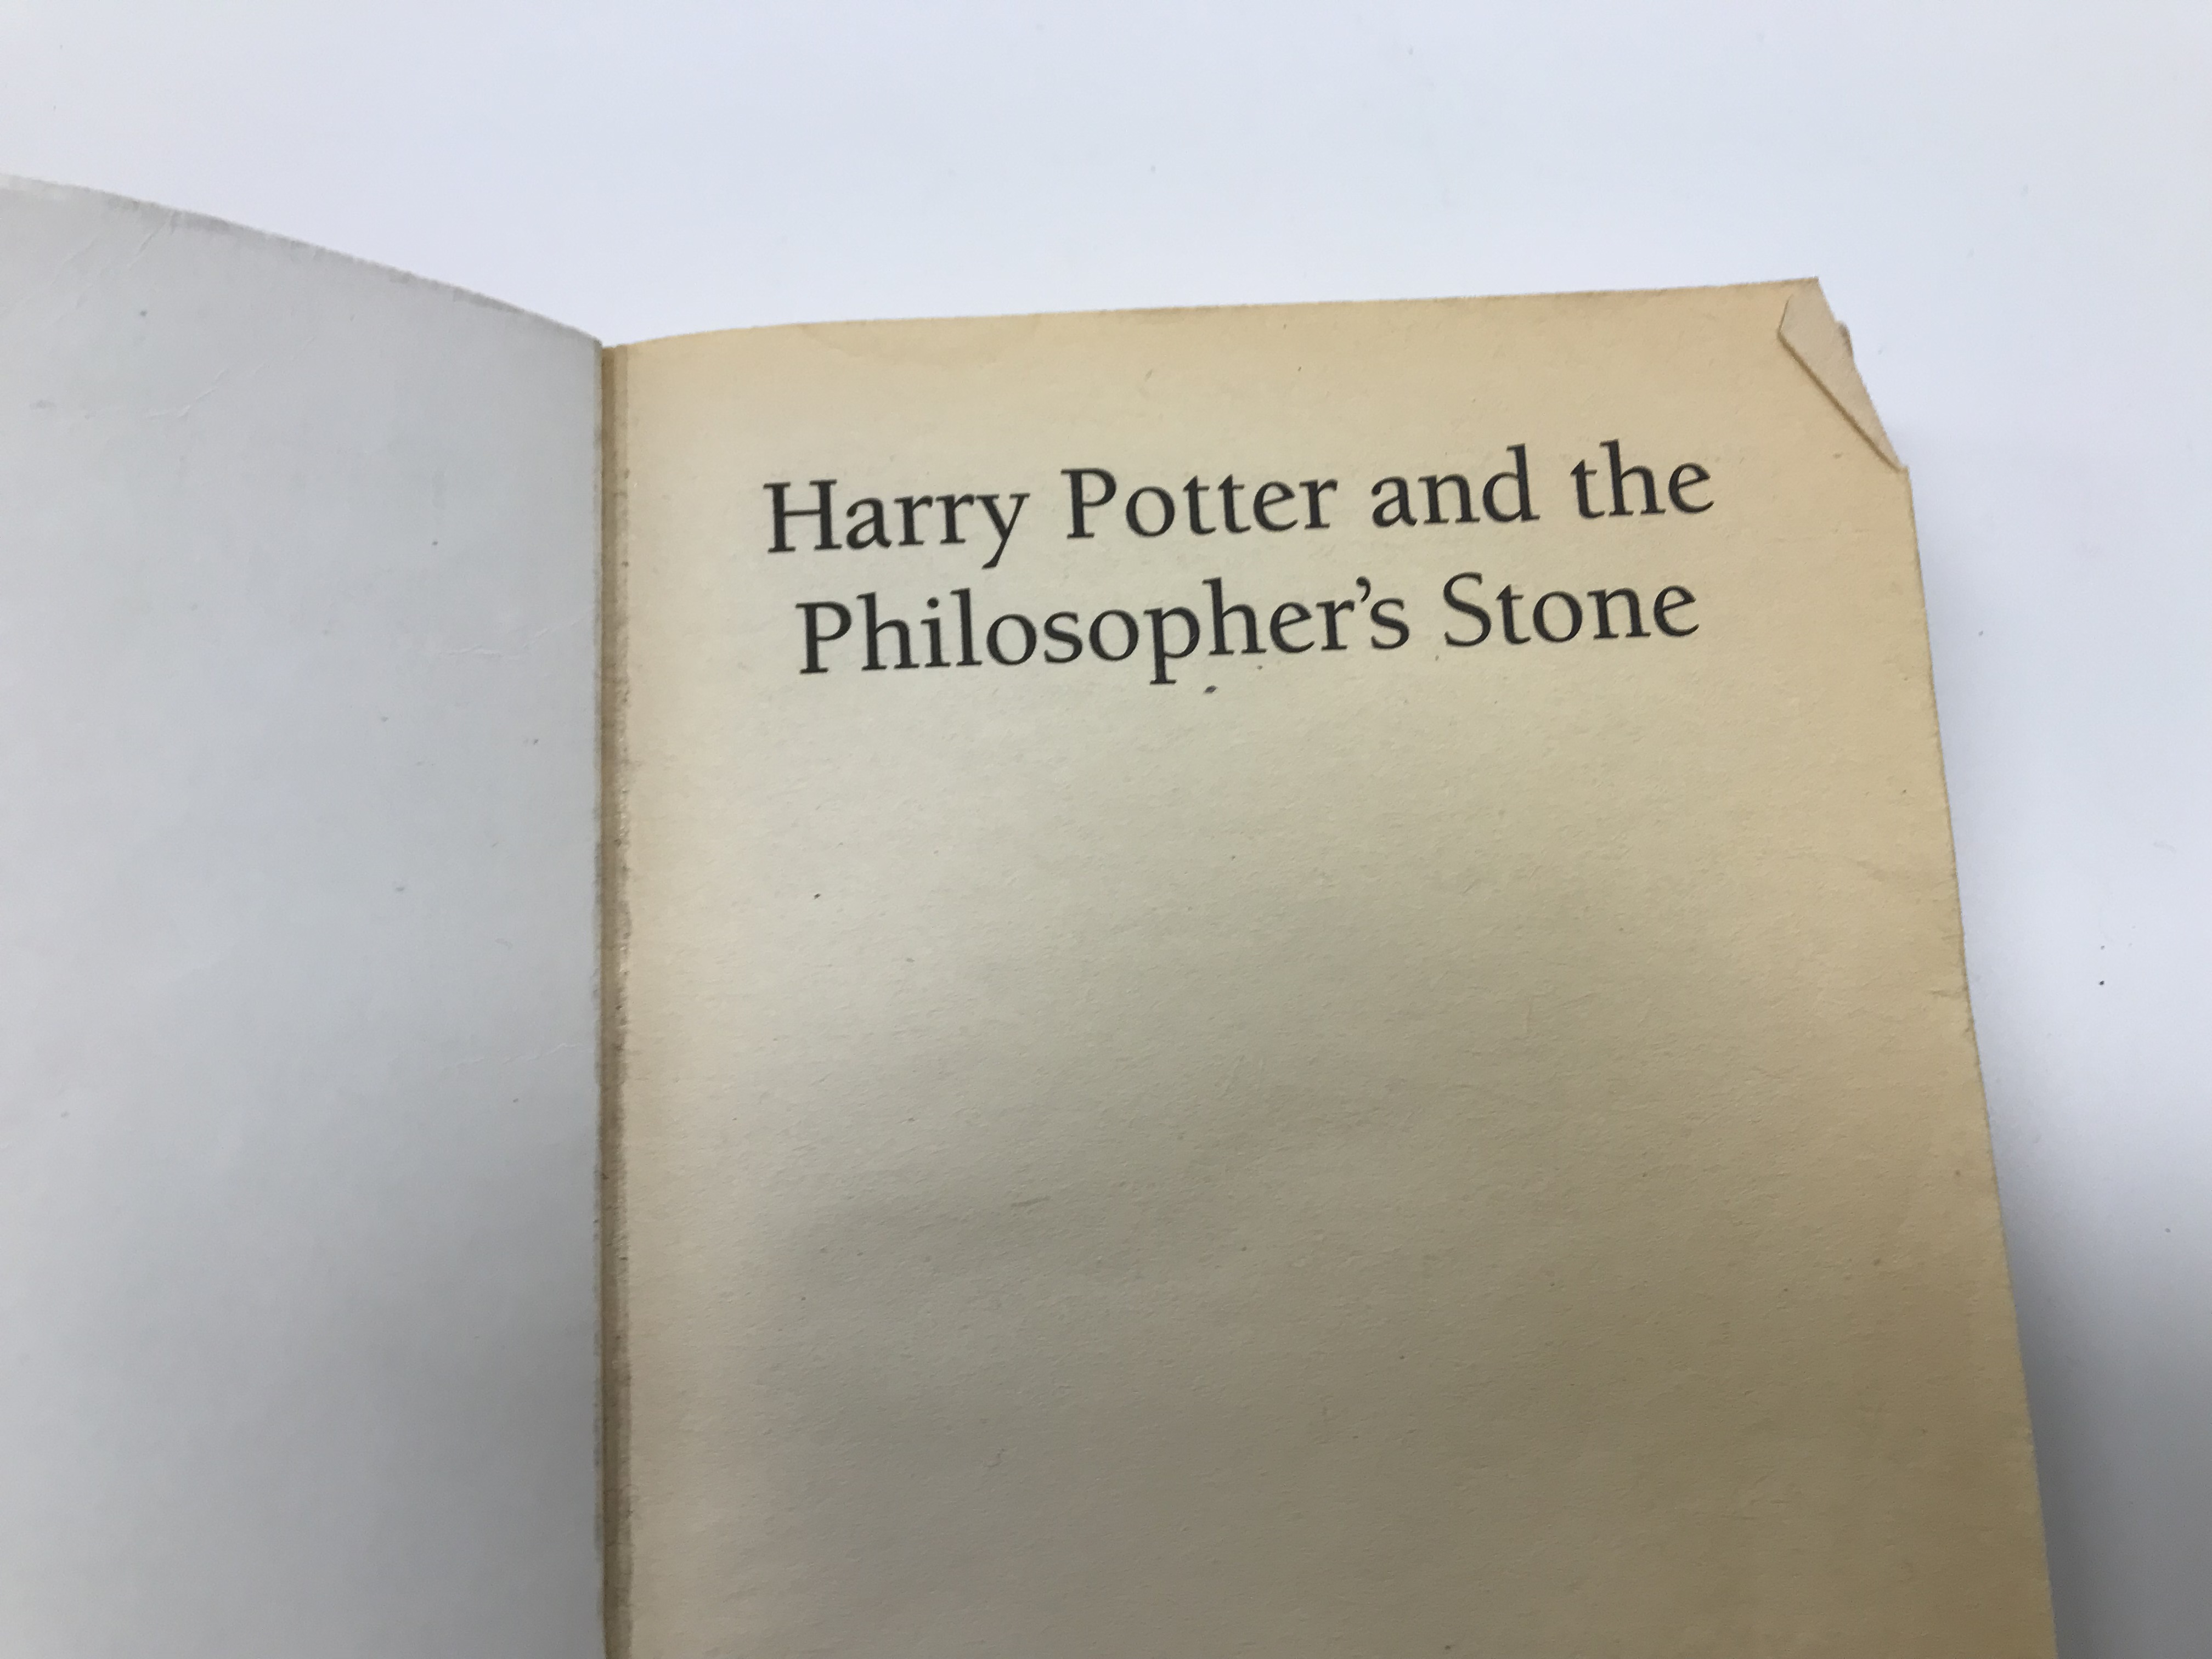 J K ROWLING "Harry Potter and The Philosopher's Stone", first edition, paperback, - Image 19 of 30